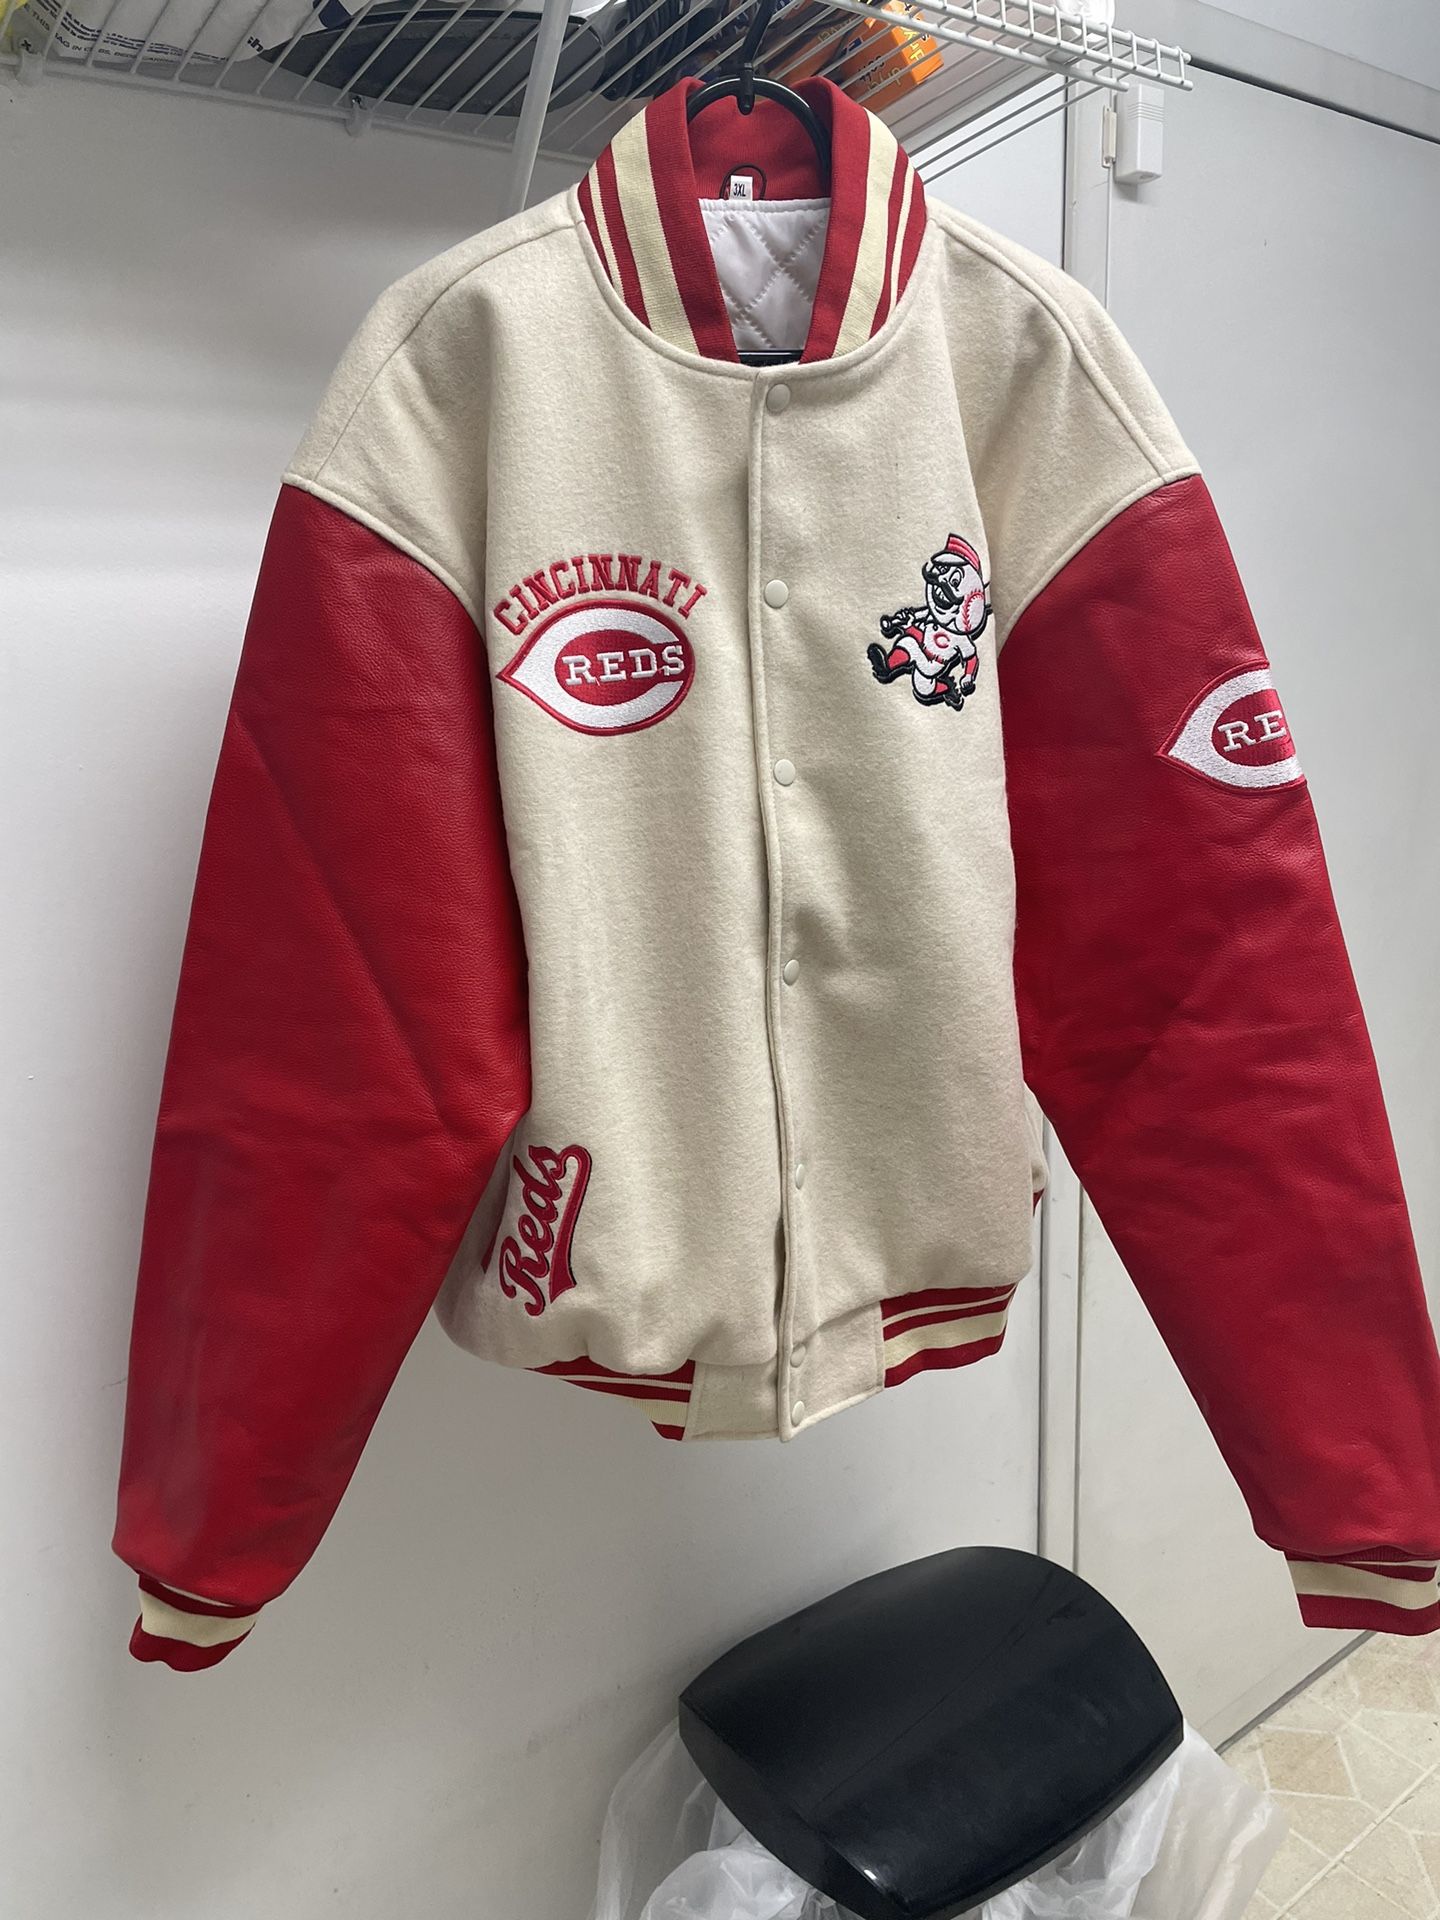 Cincinnati Reds jacket with leather sleeves  size 3xl